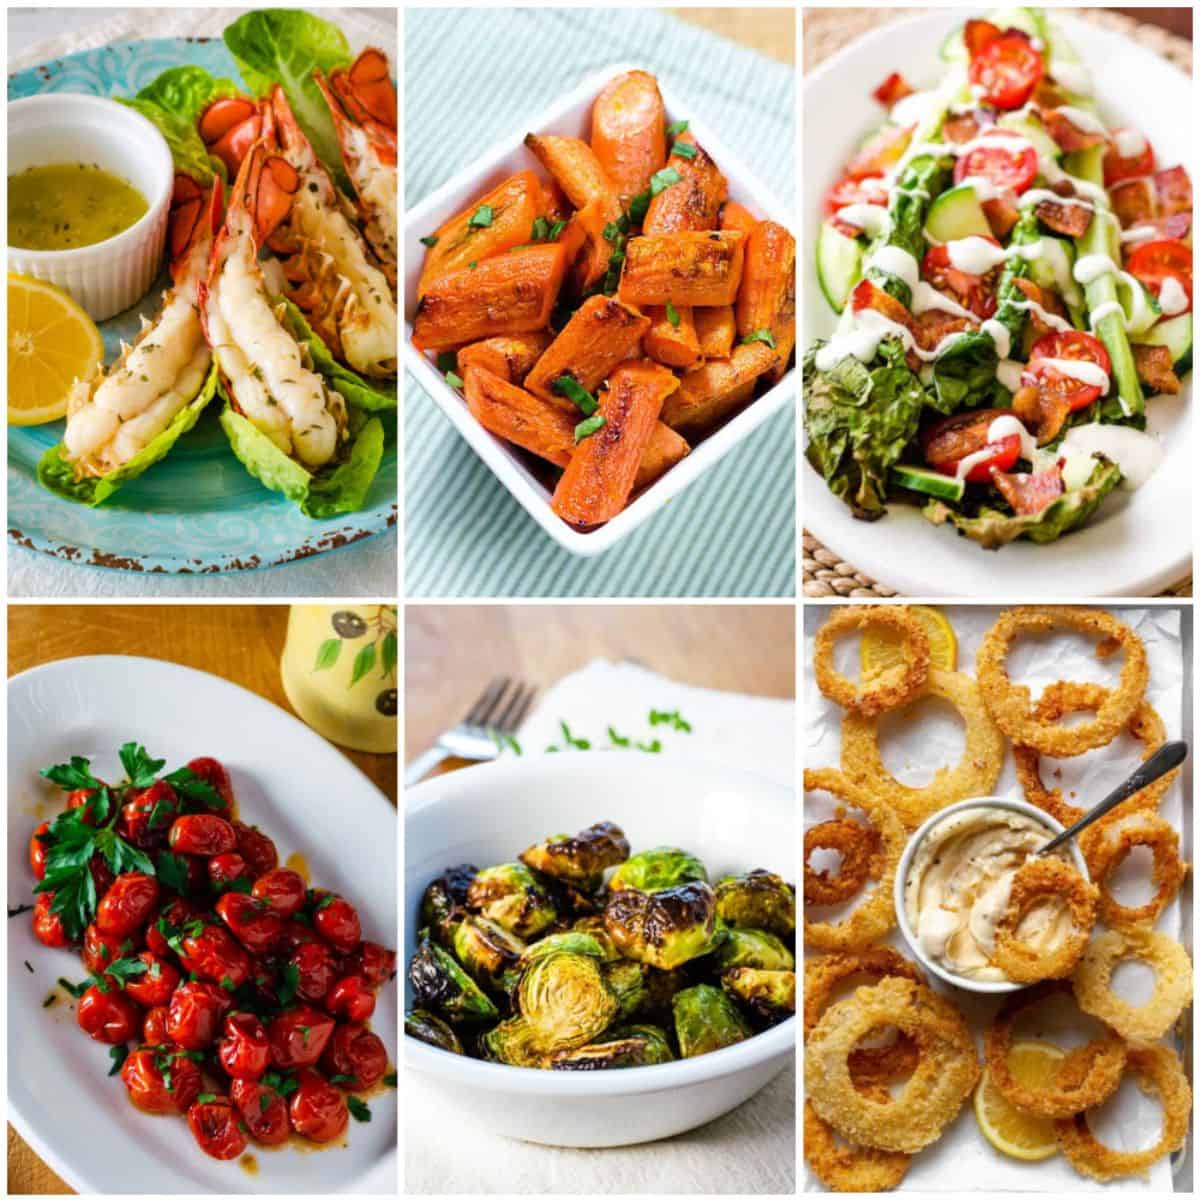 21 Easy, Delicious and Healthy Sides For Steak - Cook Eat Well